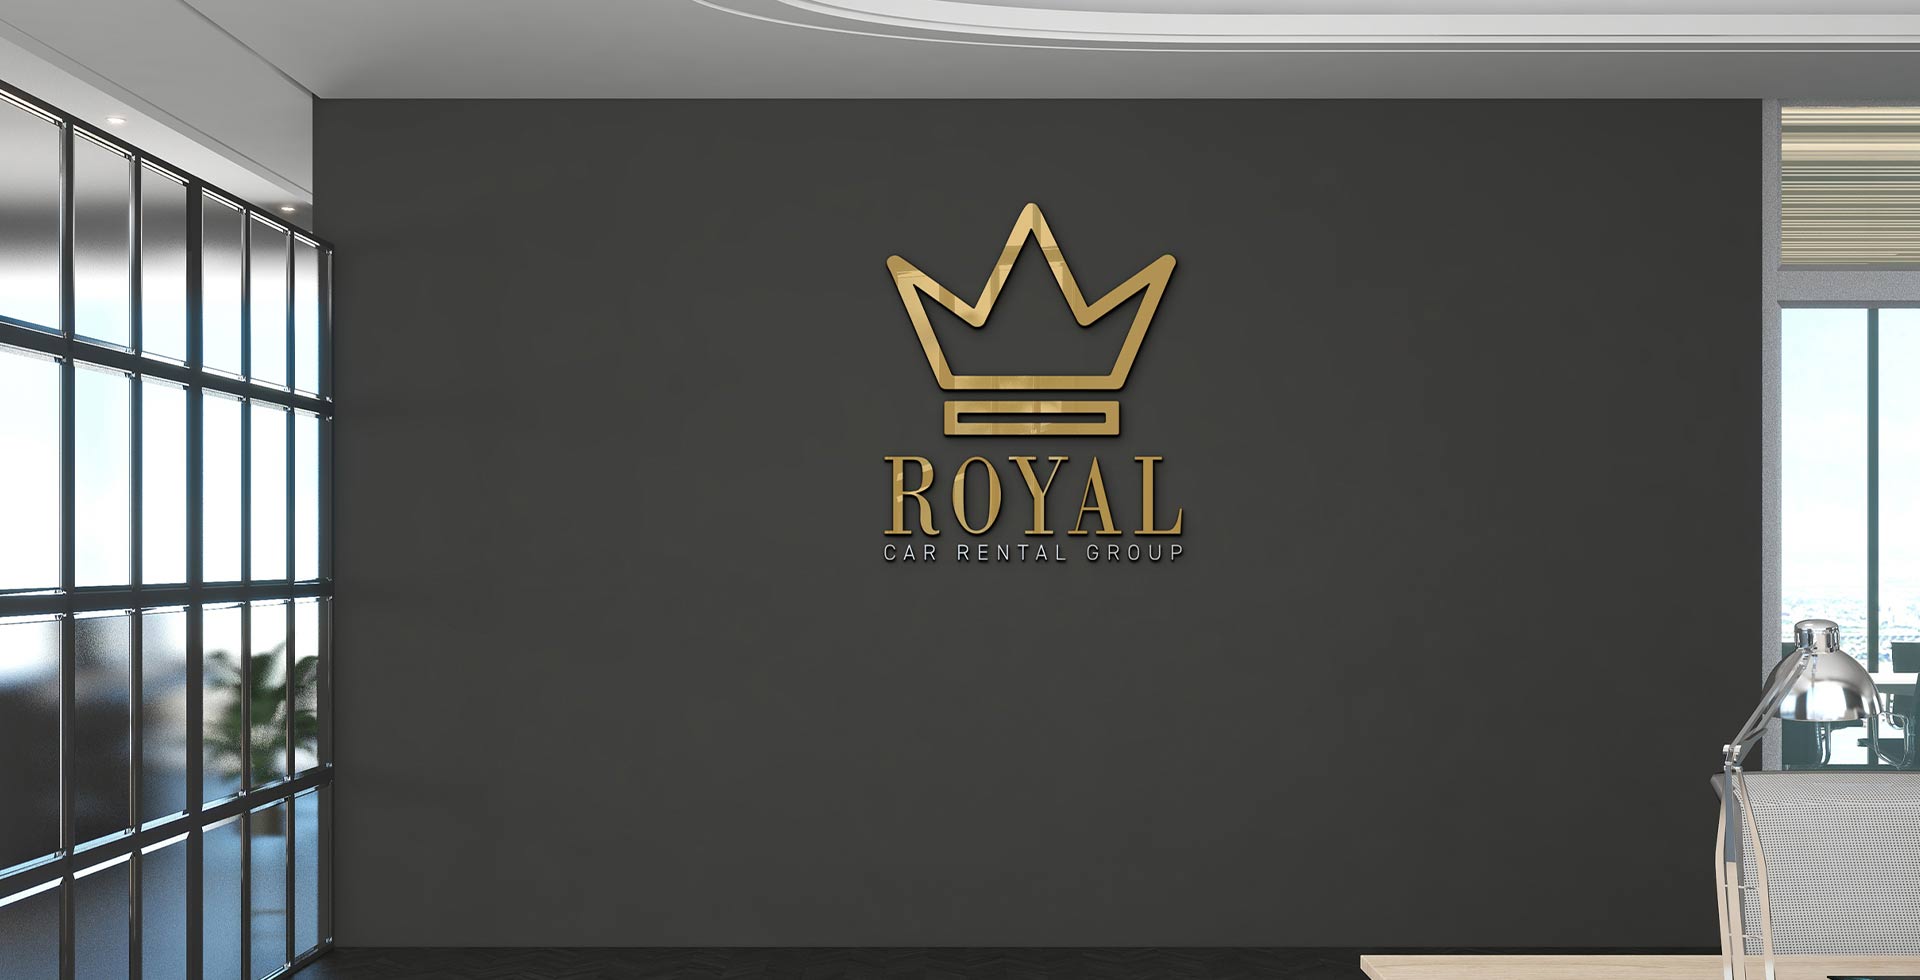 Royal Car Rental Group | Frenquently Asked Questions